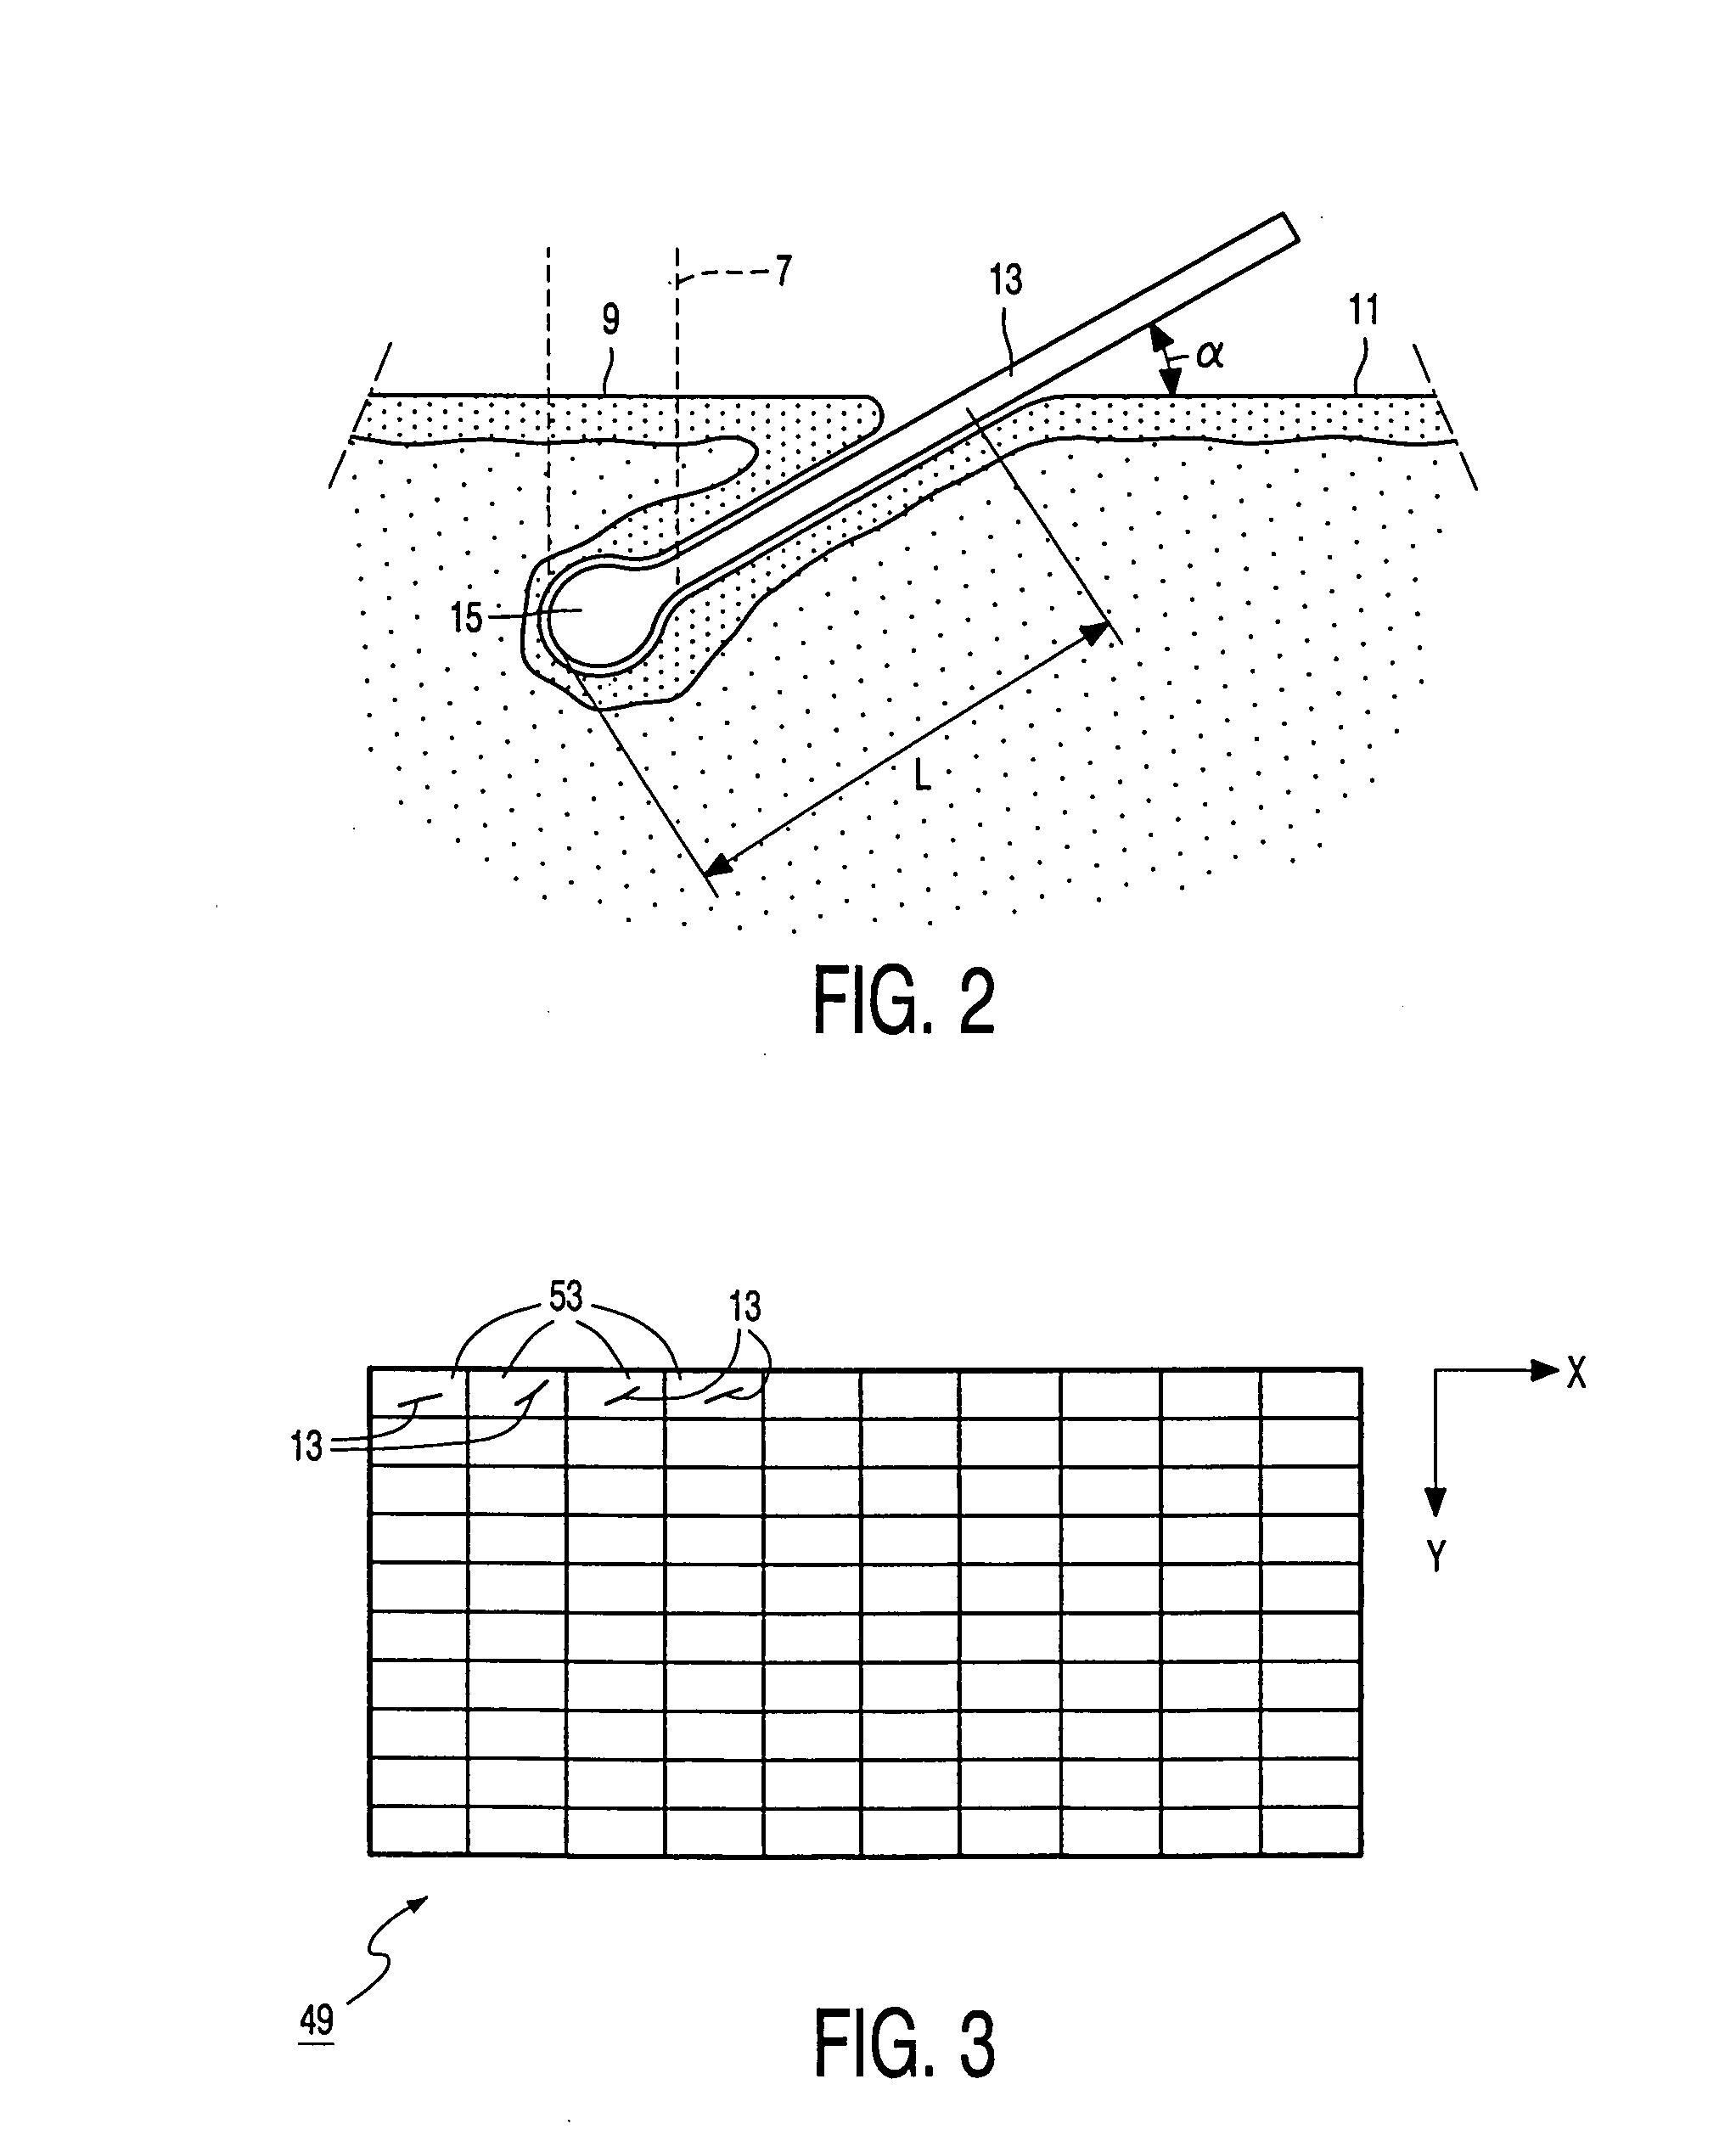 Hair-removing device with a controllable laser source